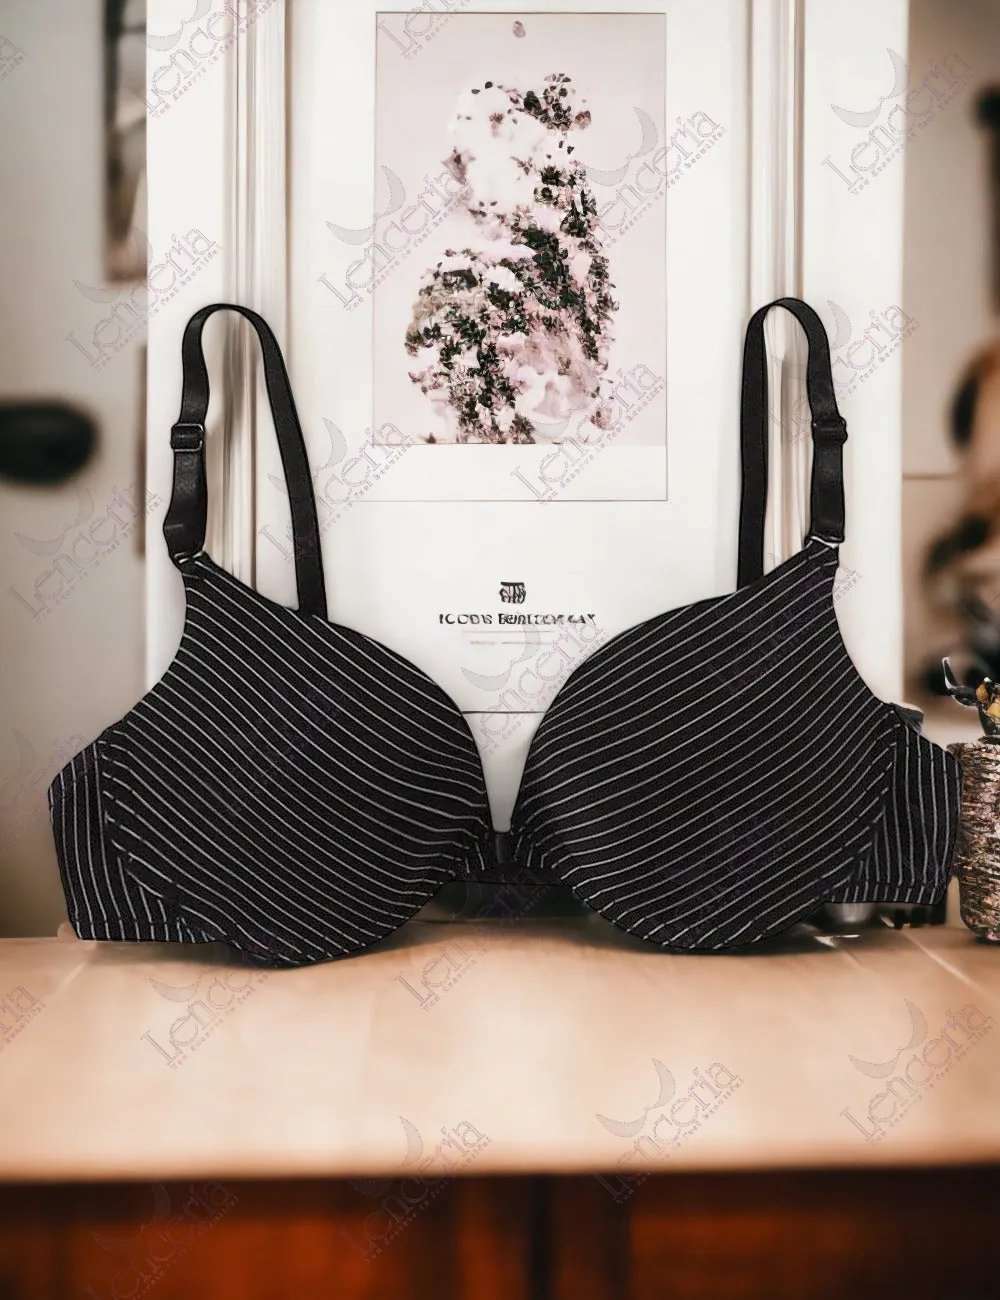 Cheriee everyday essentials lightly padded black stripe bra - extremely cute (c48)